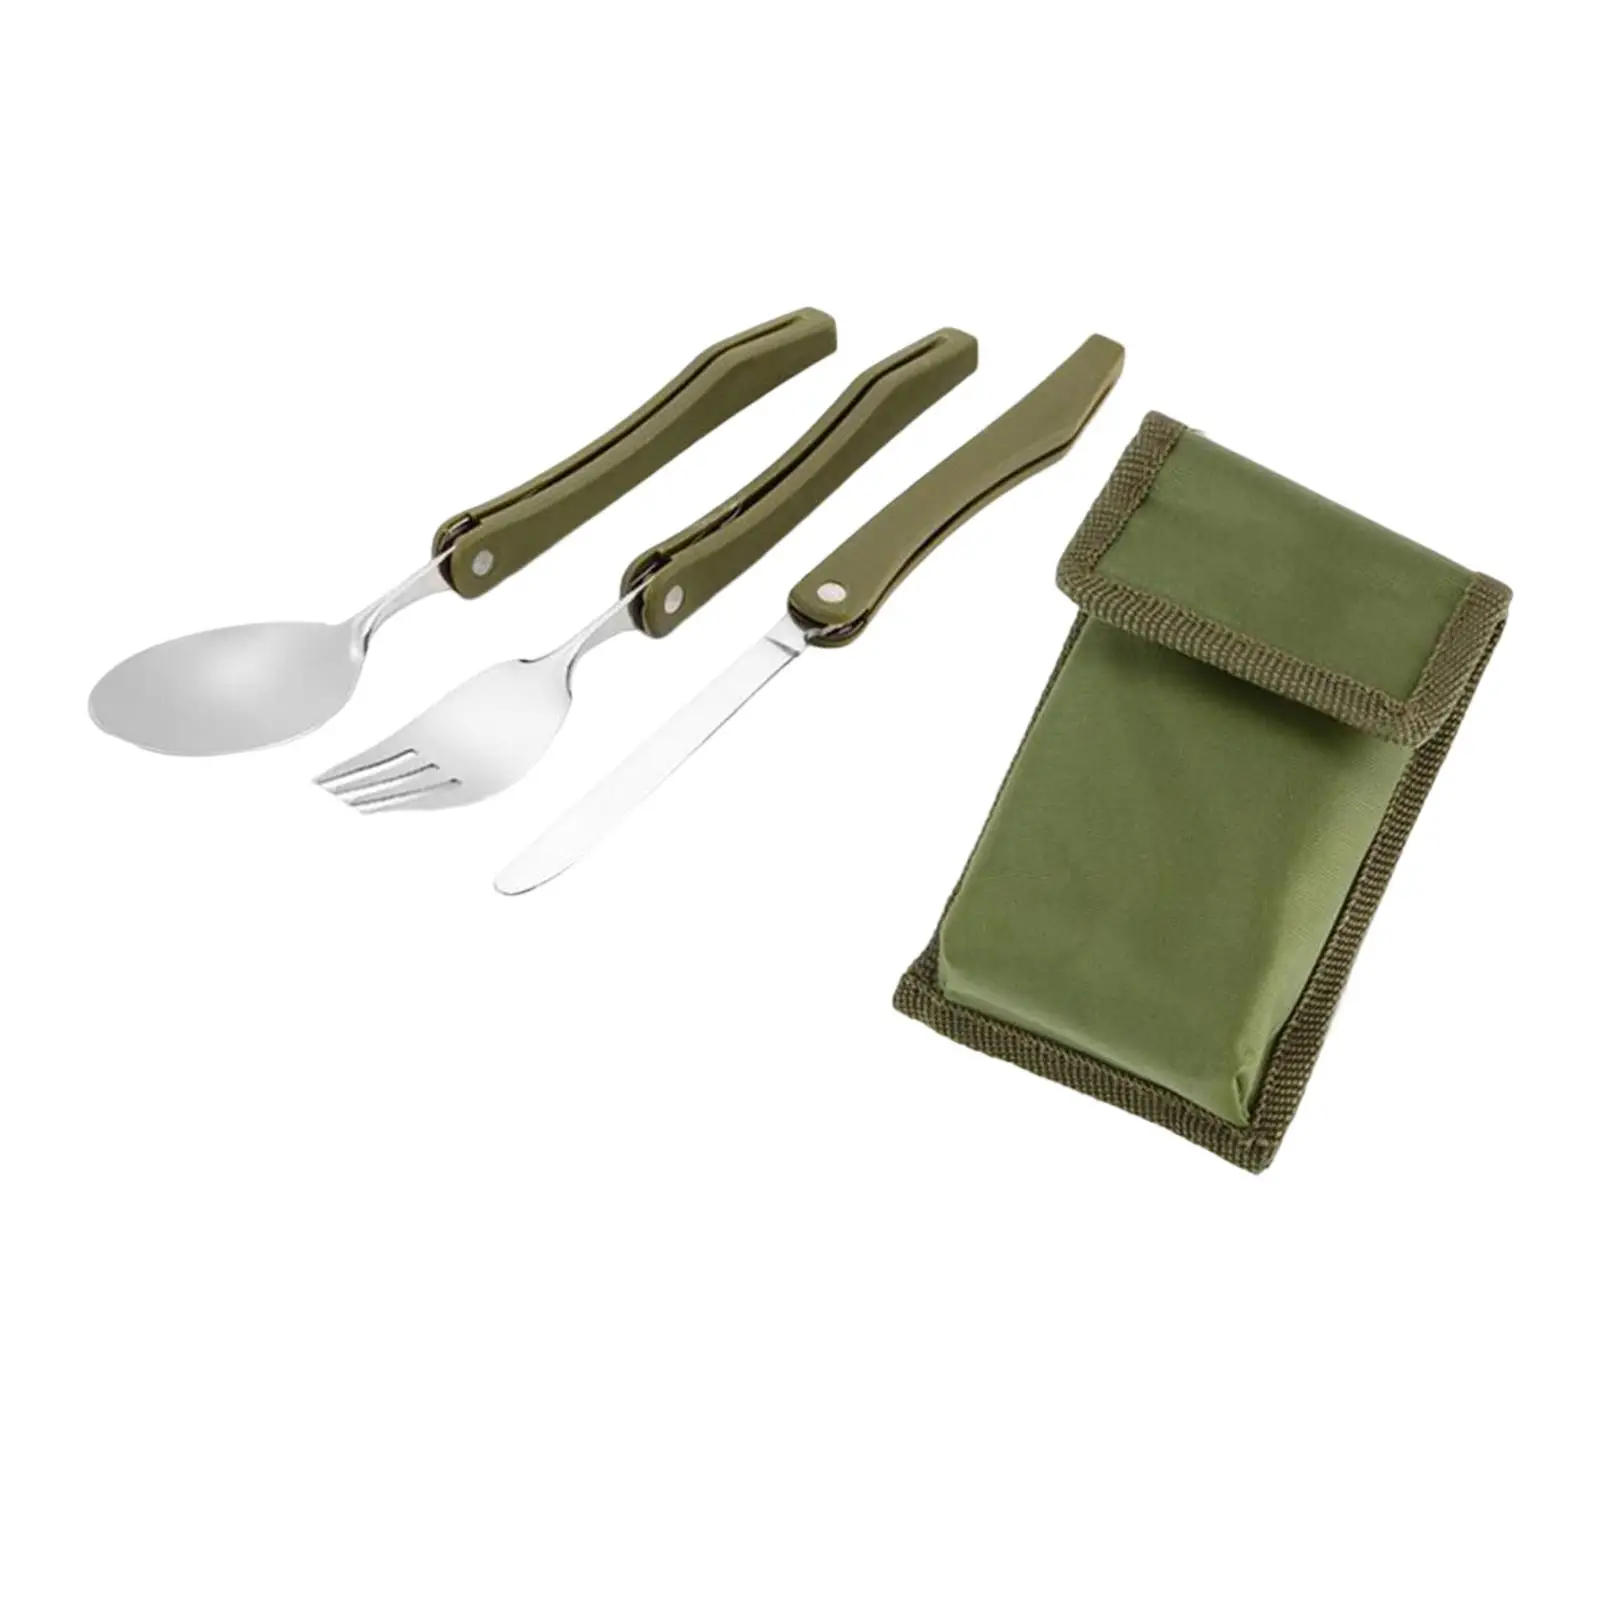 Portable Camp Cutlery Knife Spoon Set Flatware for Picnic Hiking